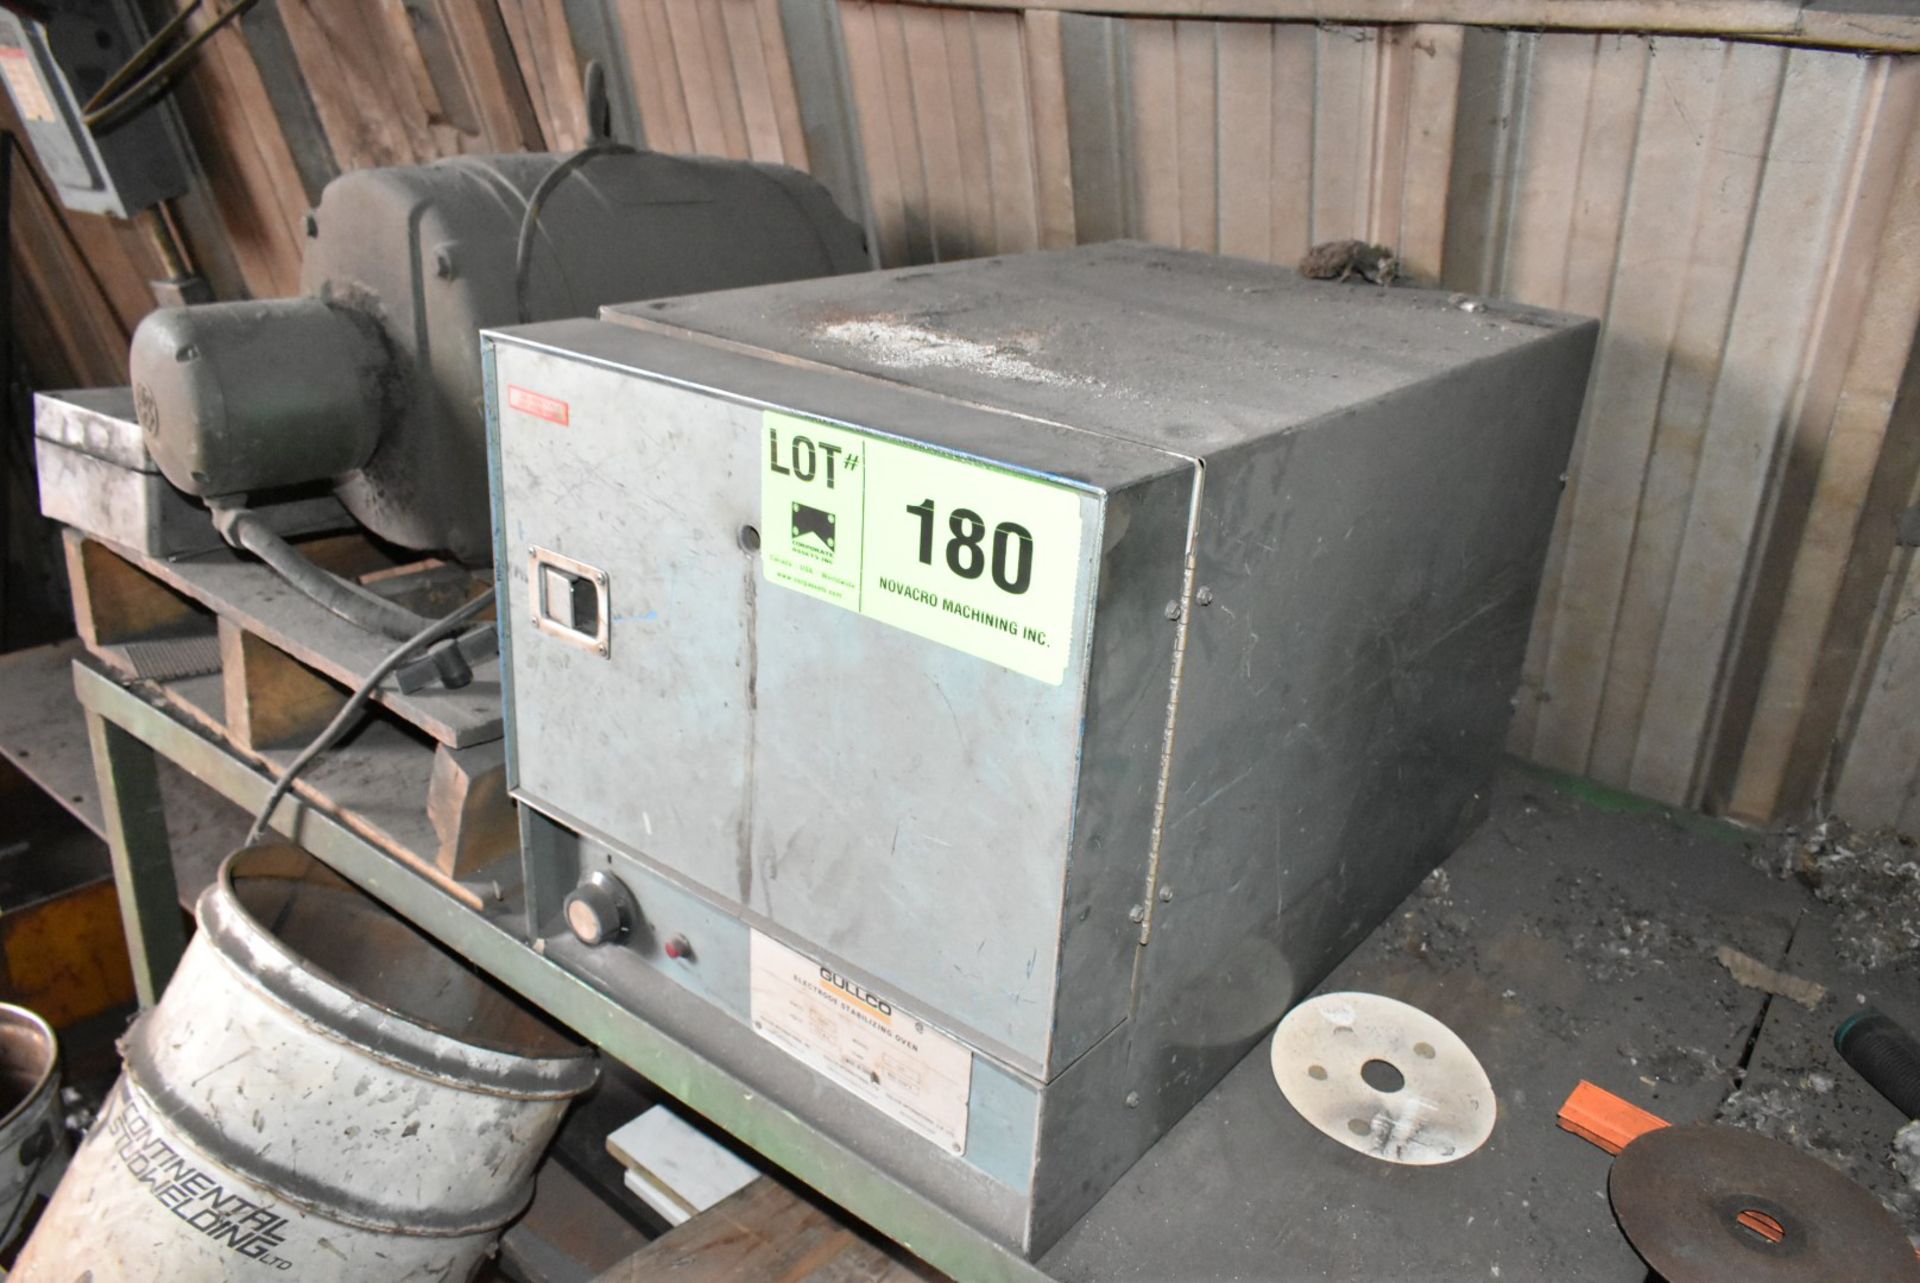 GULLCO MODEL 125 ELECTRODE STABILIZING OVEN WITH 550 DEG. F MAX. TEMPERATURE, S/N: N/A